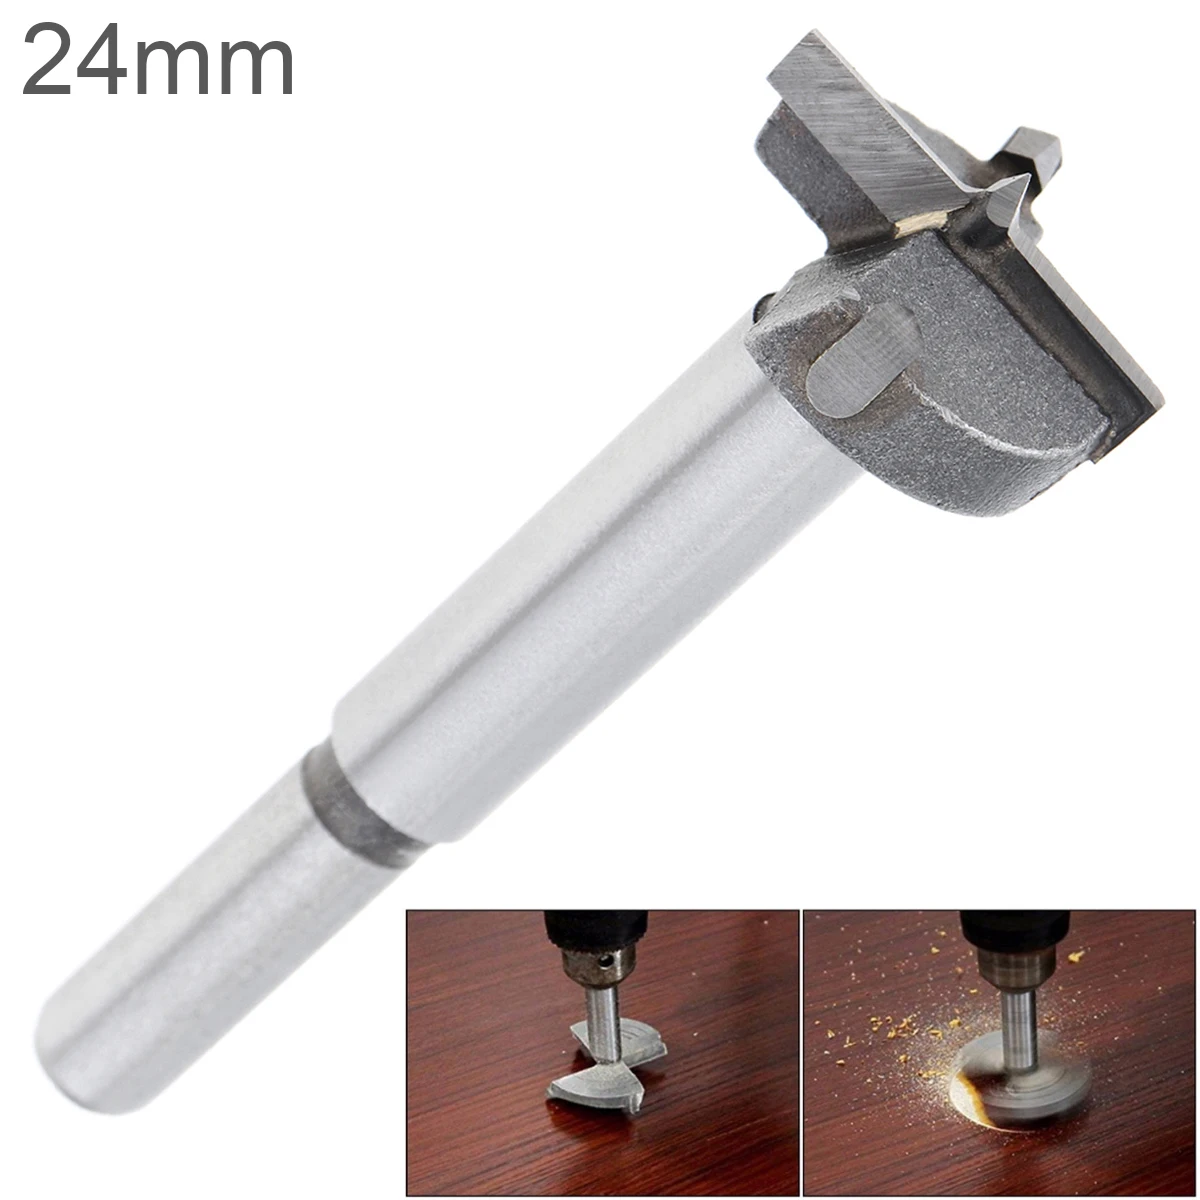 

1 PC 24mm Tungsten Steel Hard Alloy Wood Drill Bits Woodworking Hole Opener for Drilling on /Plastic Boards/Wooden Board